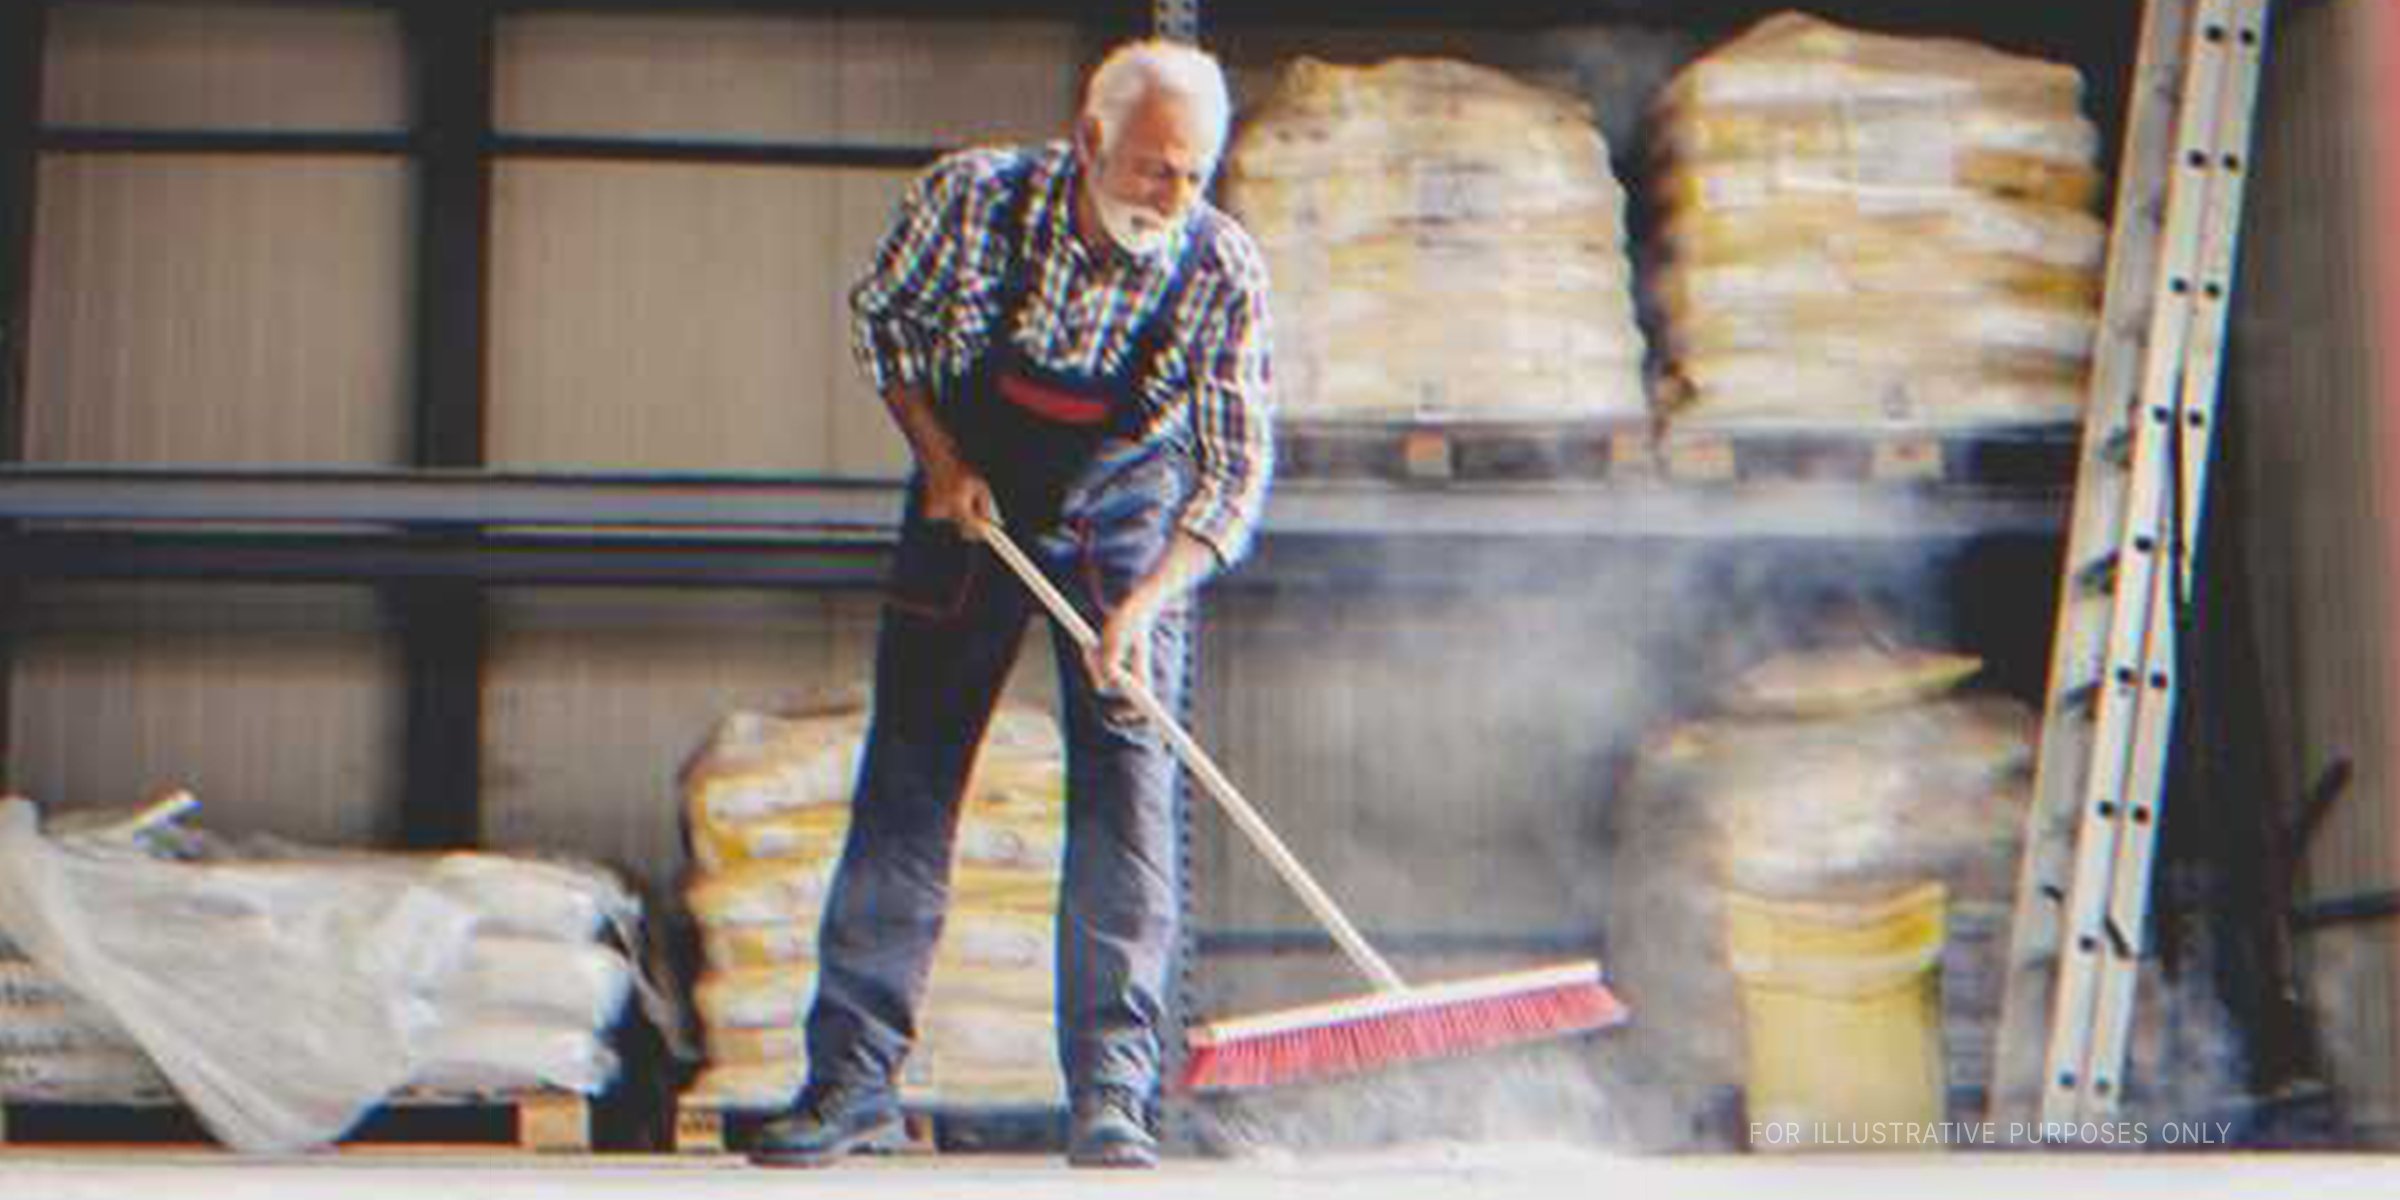 Old man sweeping with a broom. | Source: Shutterstock